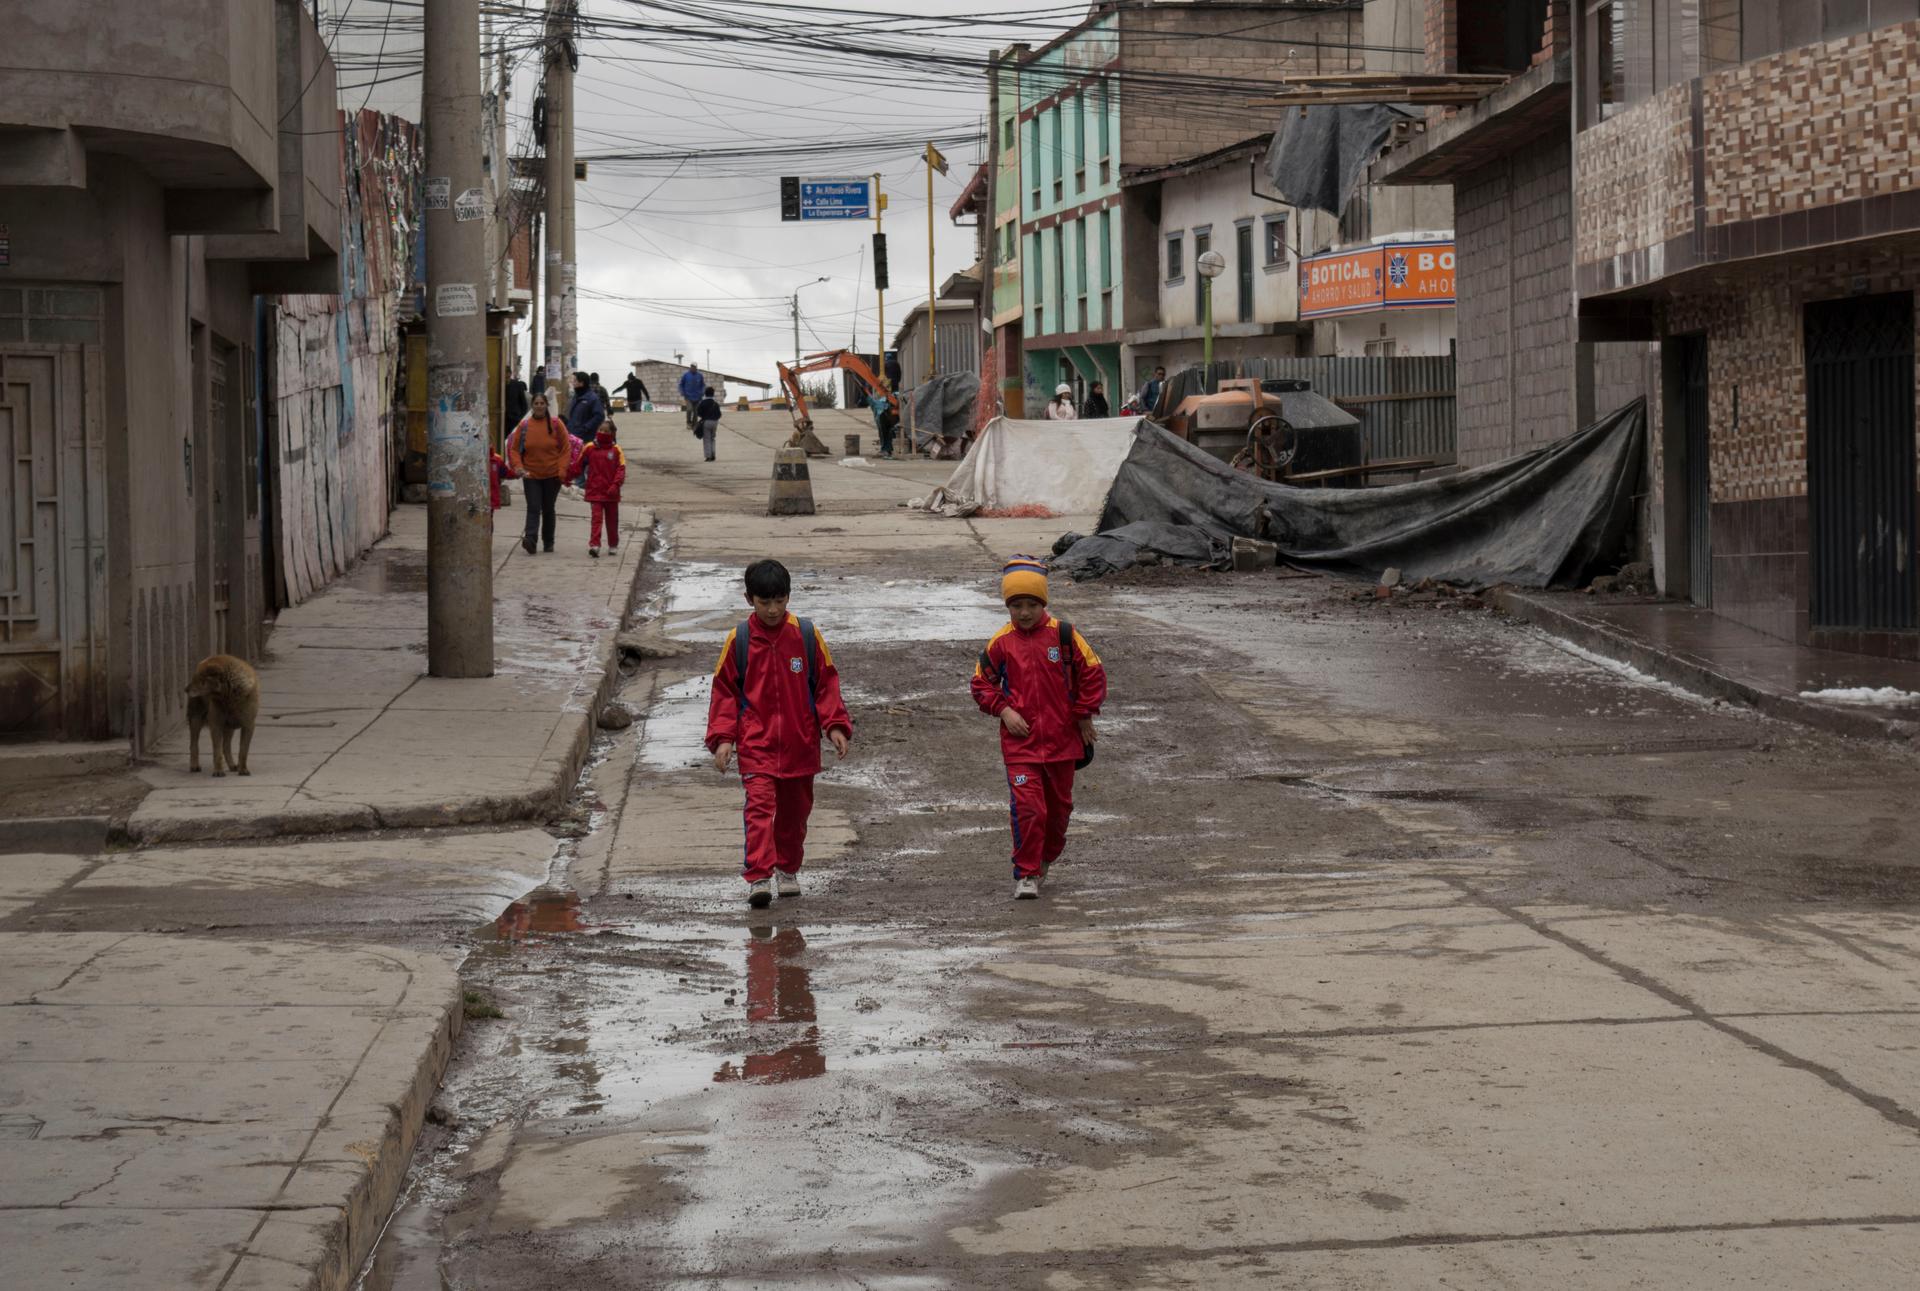 Local authorities say heavy-metal pollution has caused mental retardation, genetic malformations and brain damage, which ultimately leads to death if untreated, according to Peru's environmental regulator.